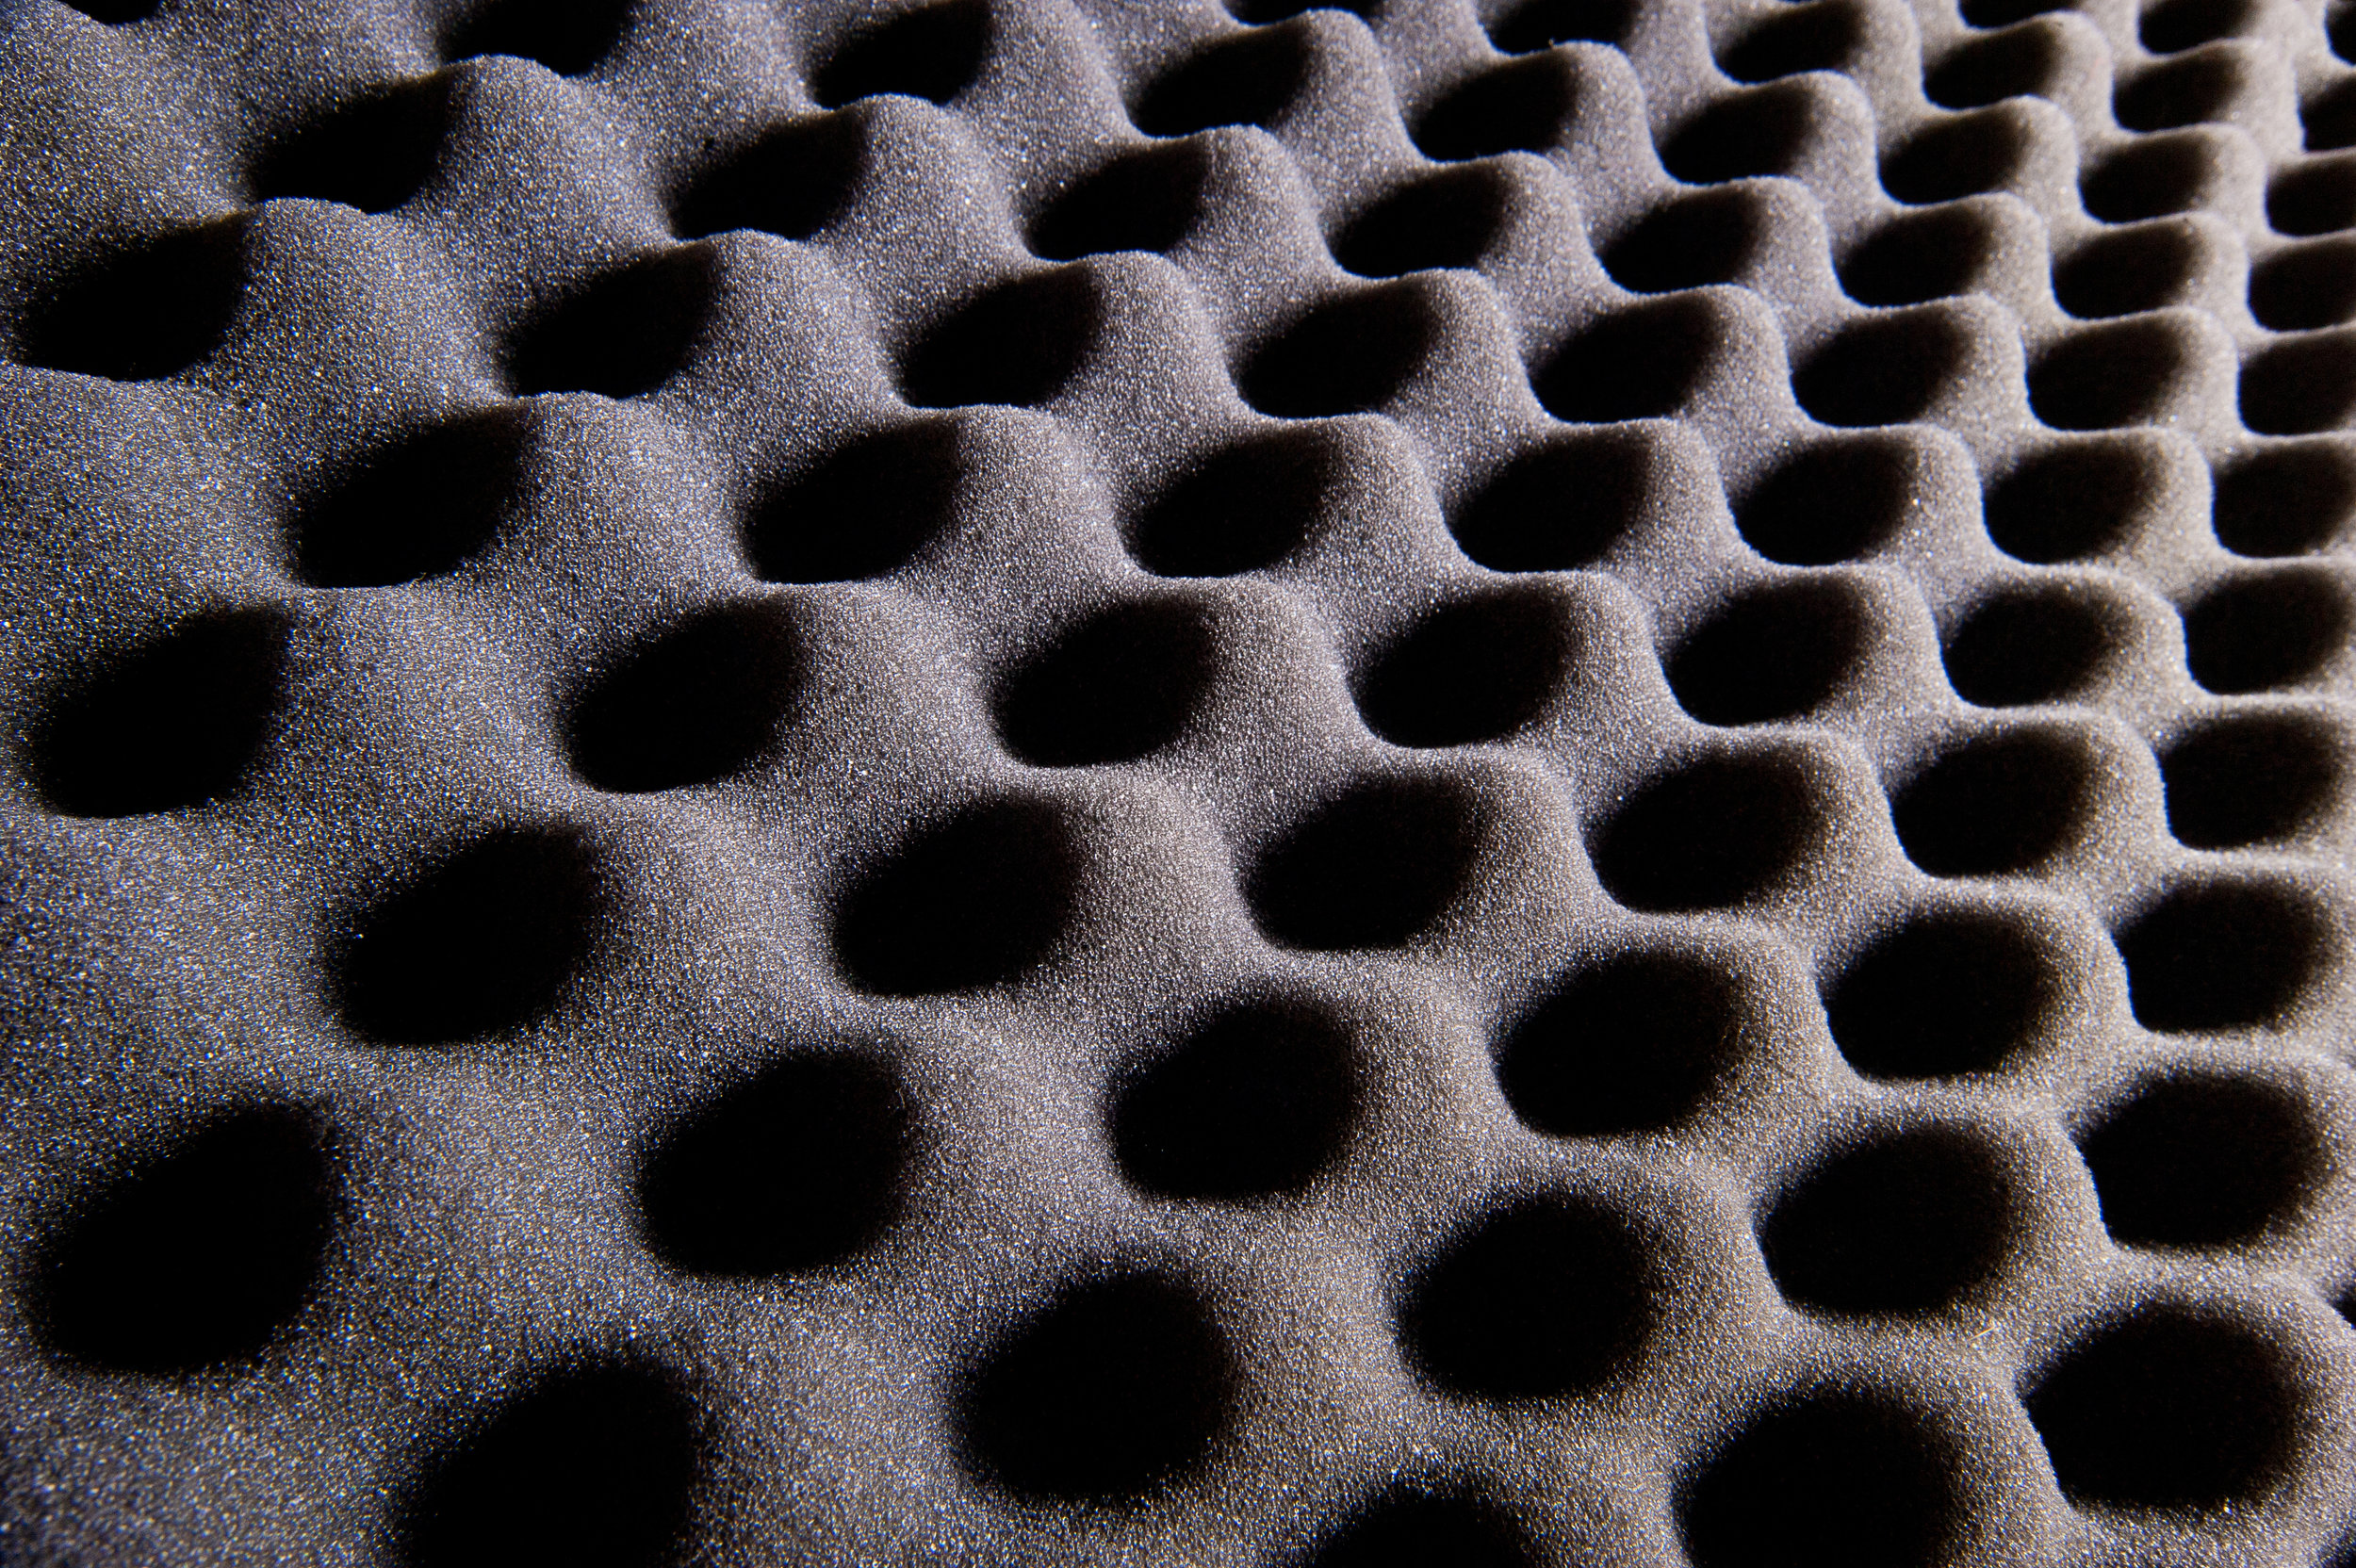 NON-LAUDER-ABLE PRODUCTS (FOAM)